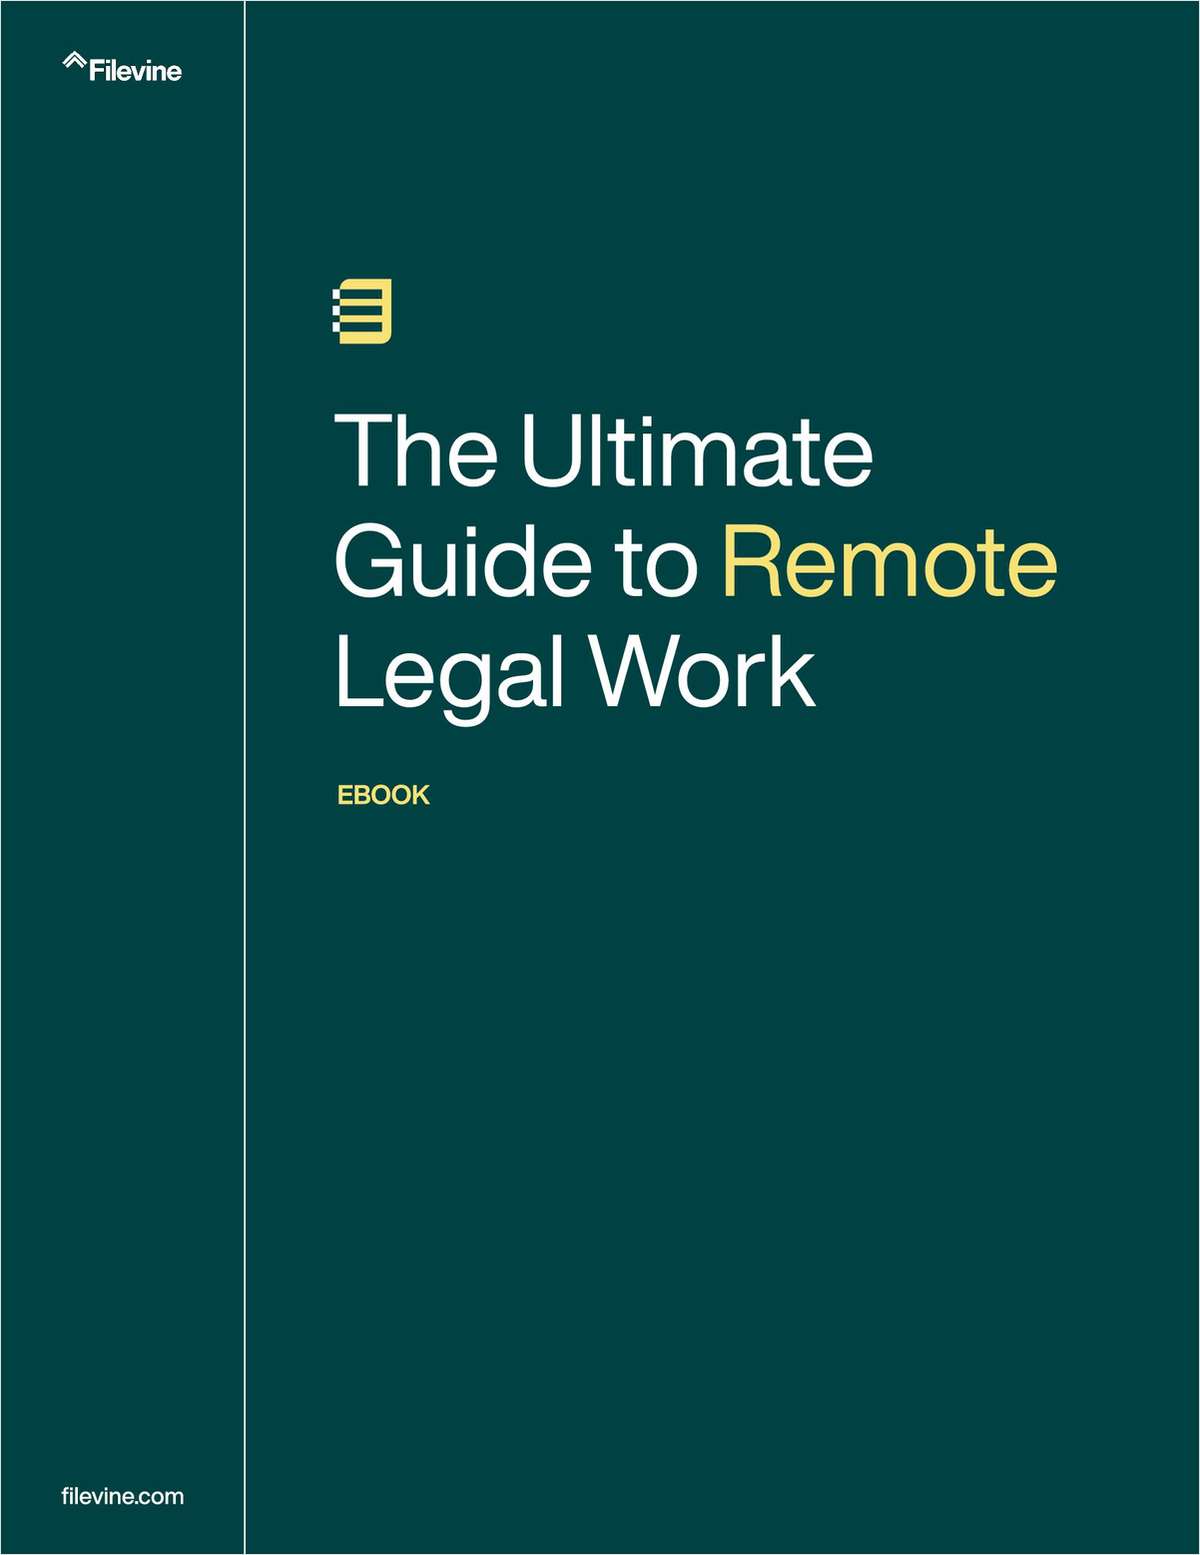 There is no one-size-fits-all model for legal remote work, but there are some considerations that are important for every firm and legal department to address before choosing whether to adopt or update a remote work framework.